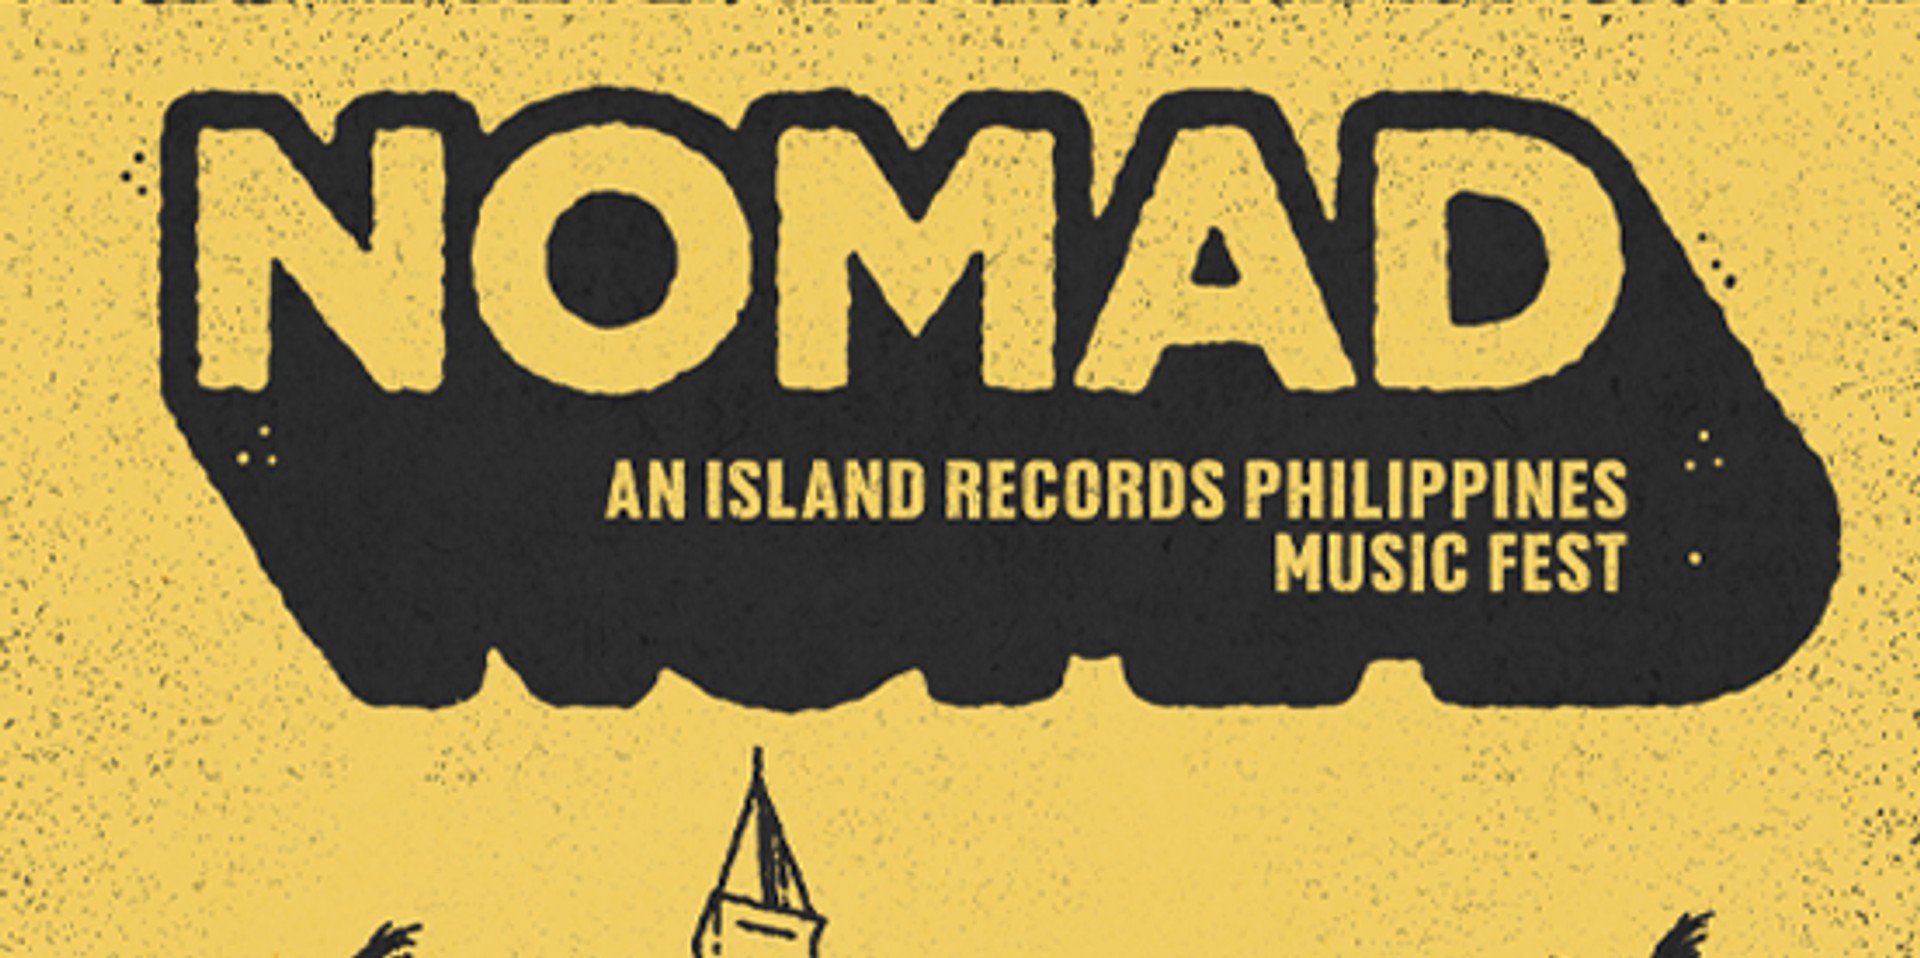 Island Records Philippines to celebrate 2nd anniversary with Nomad Music Fest